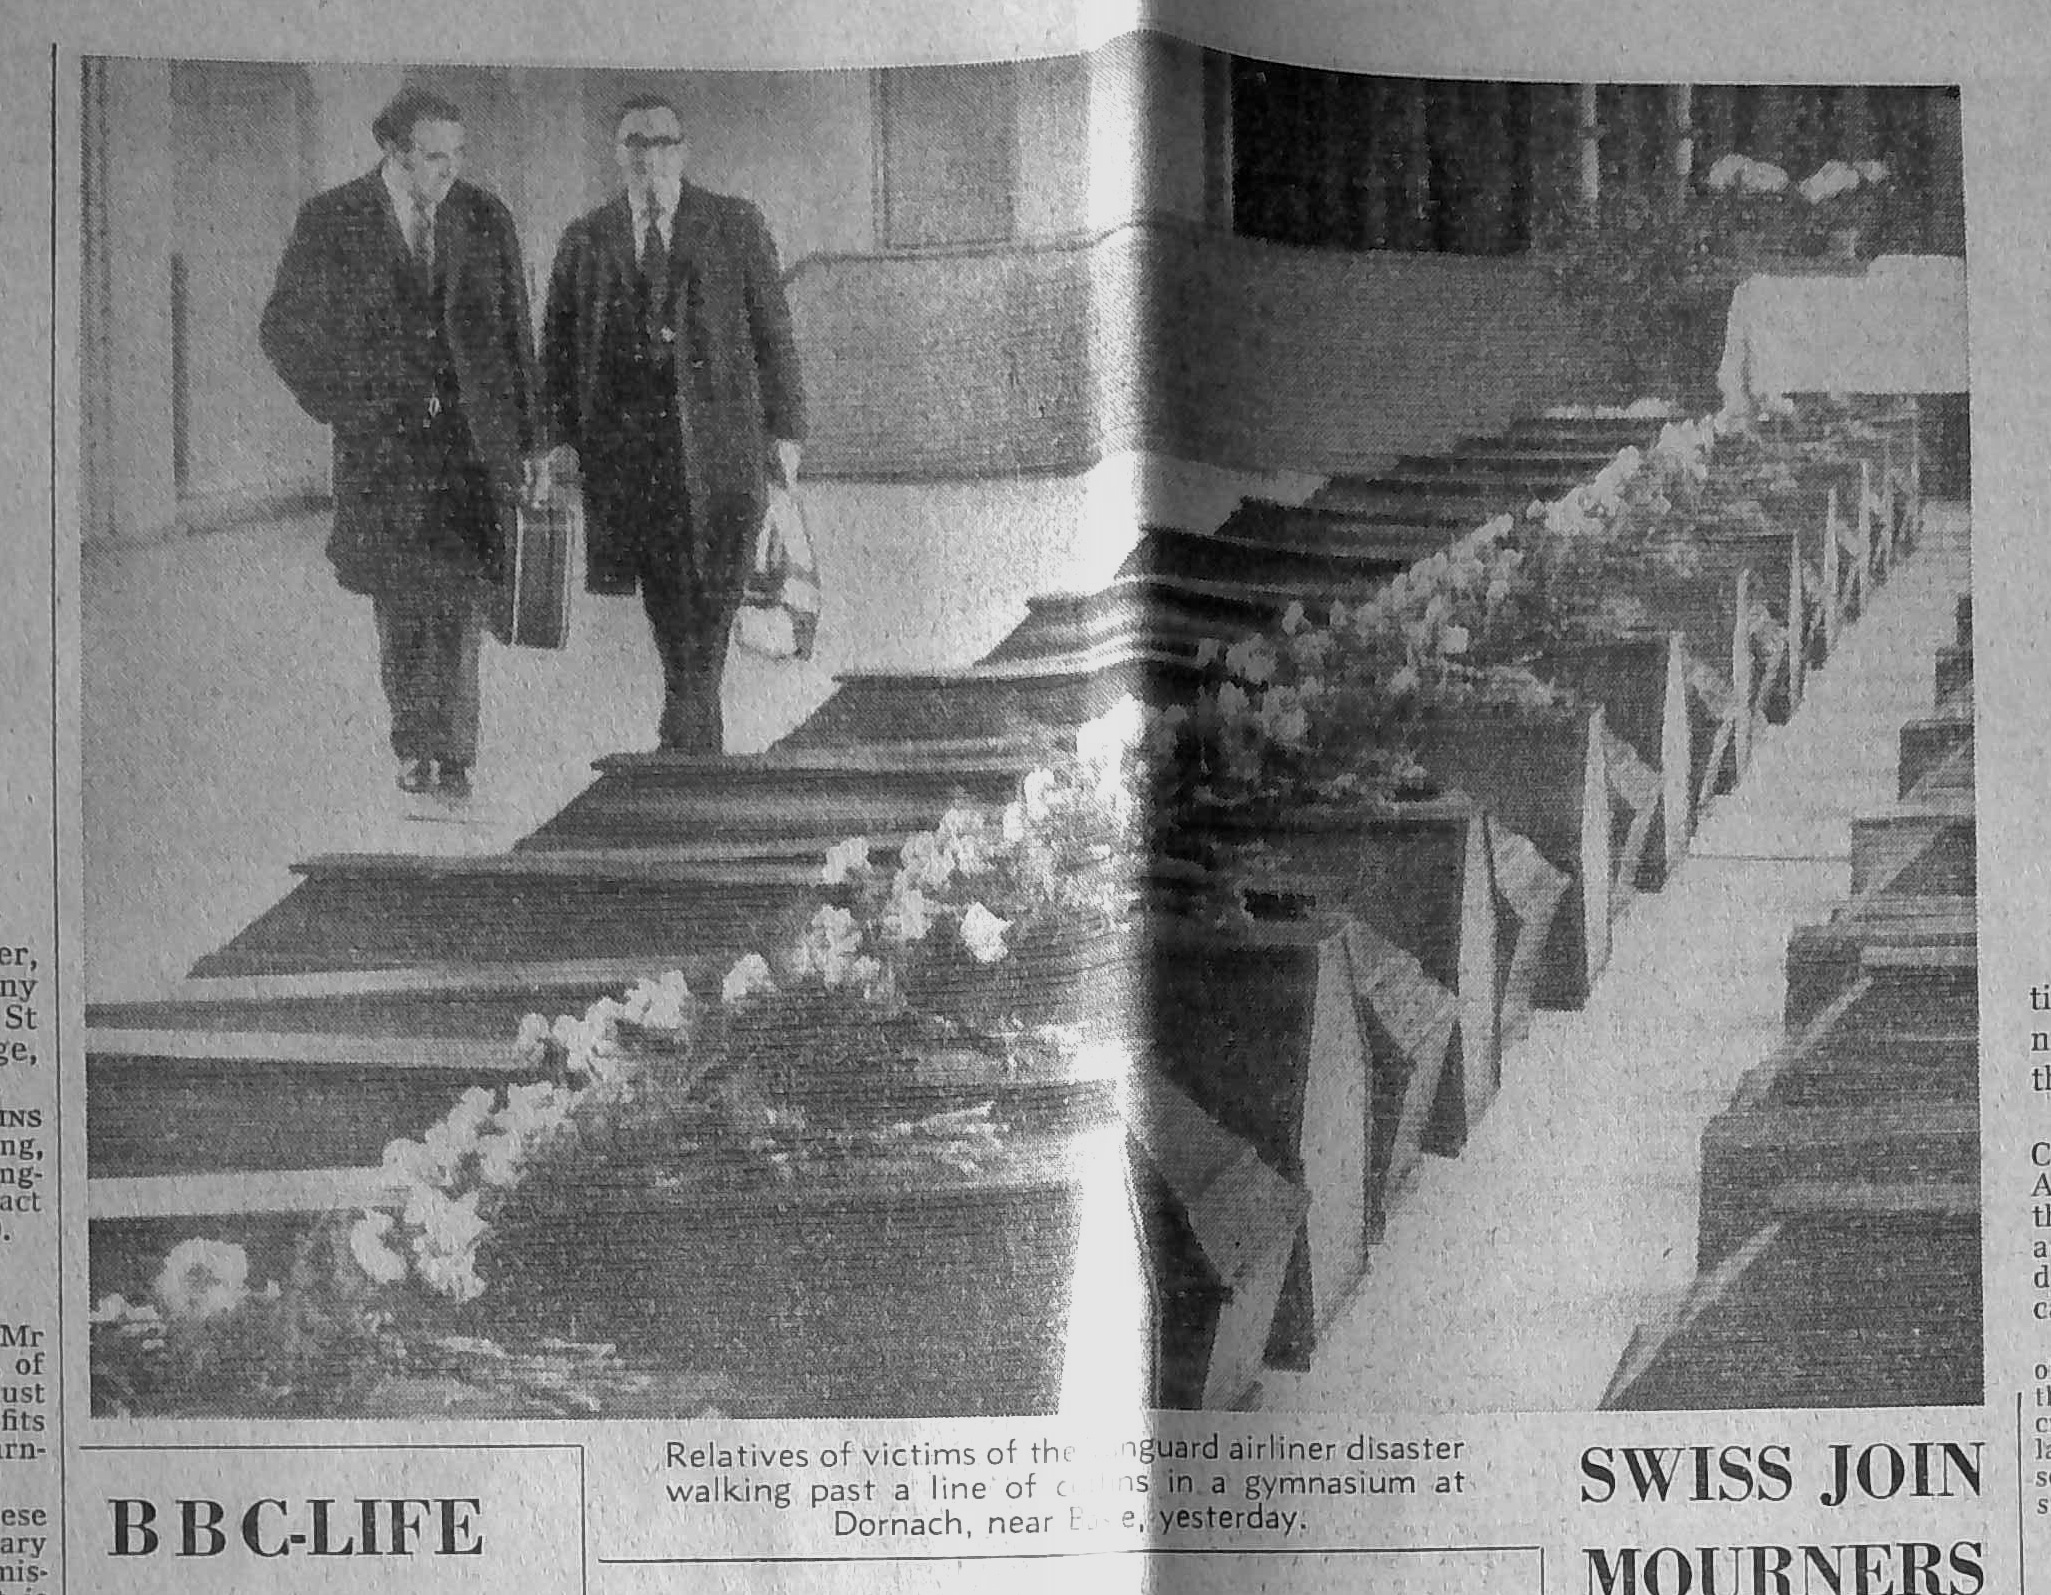 SWISS JOIN MOURNERS IN CHURCH